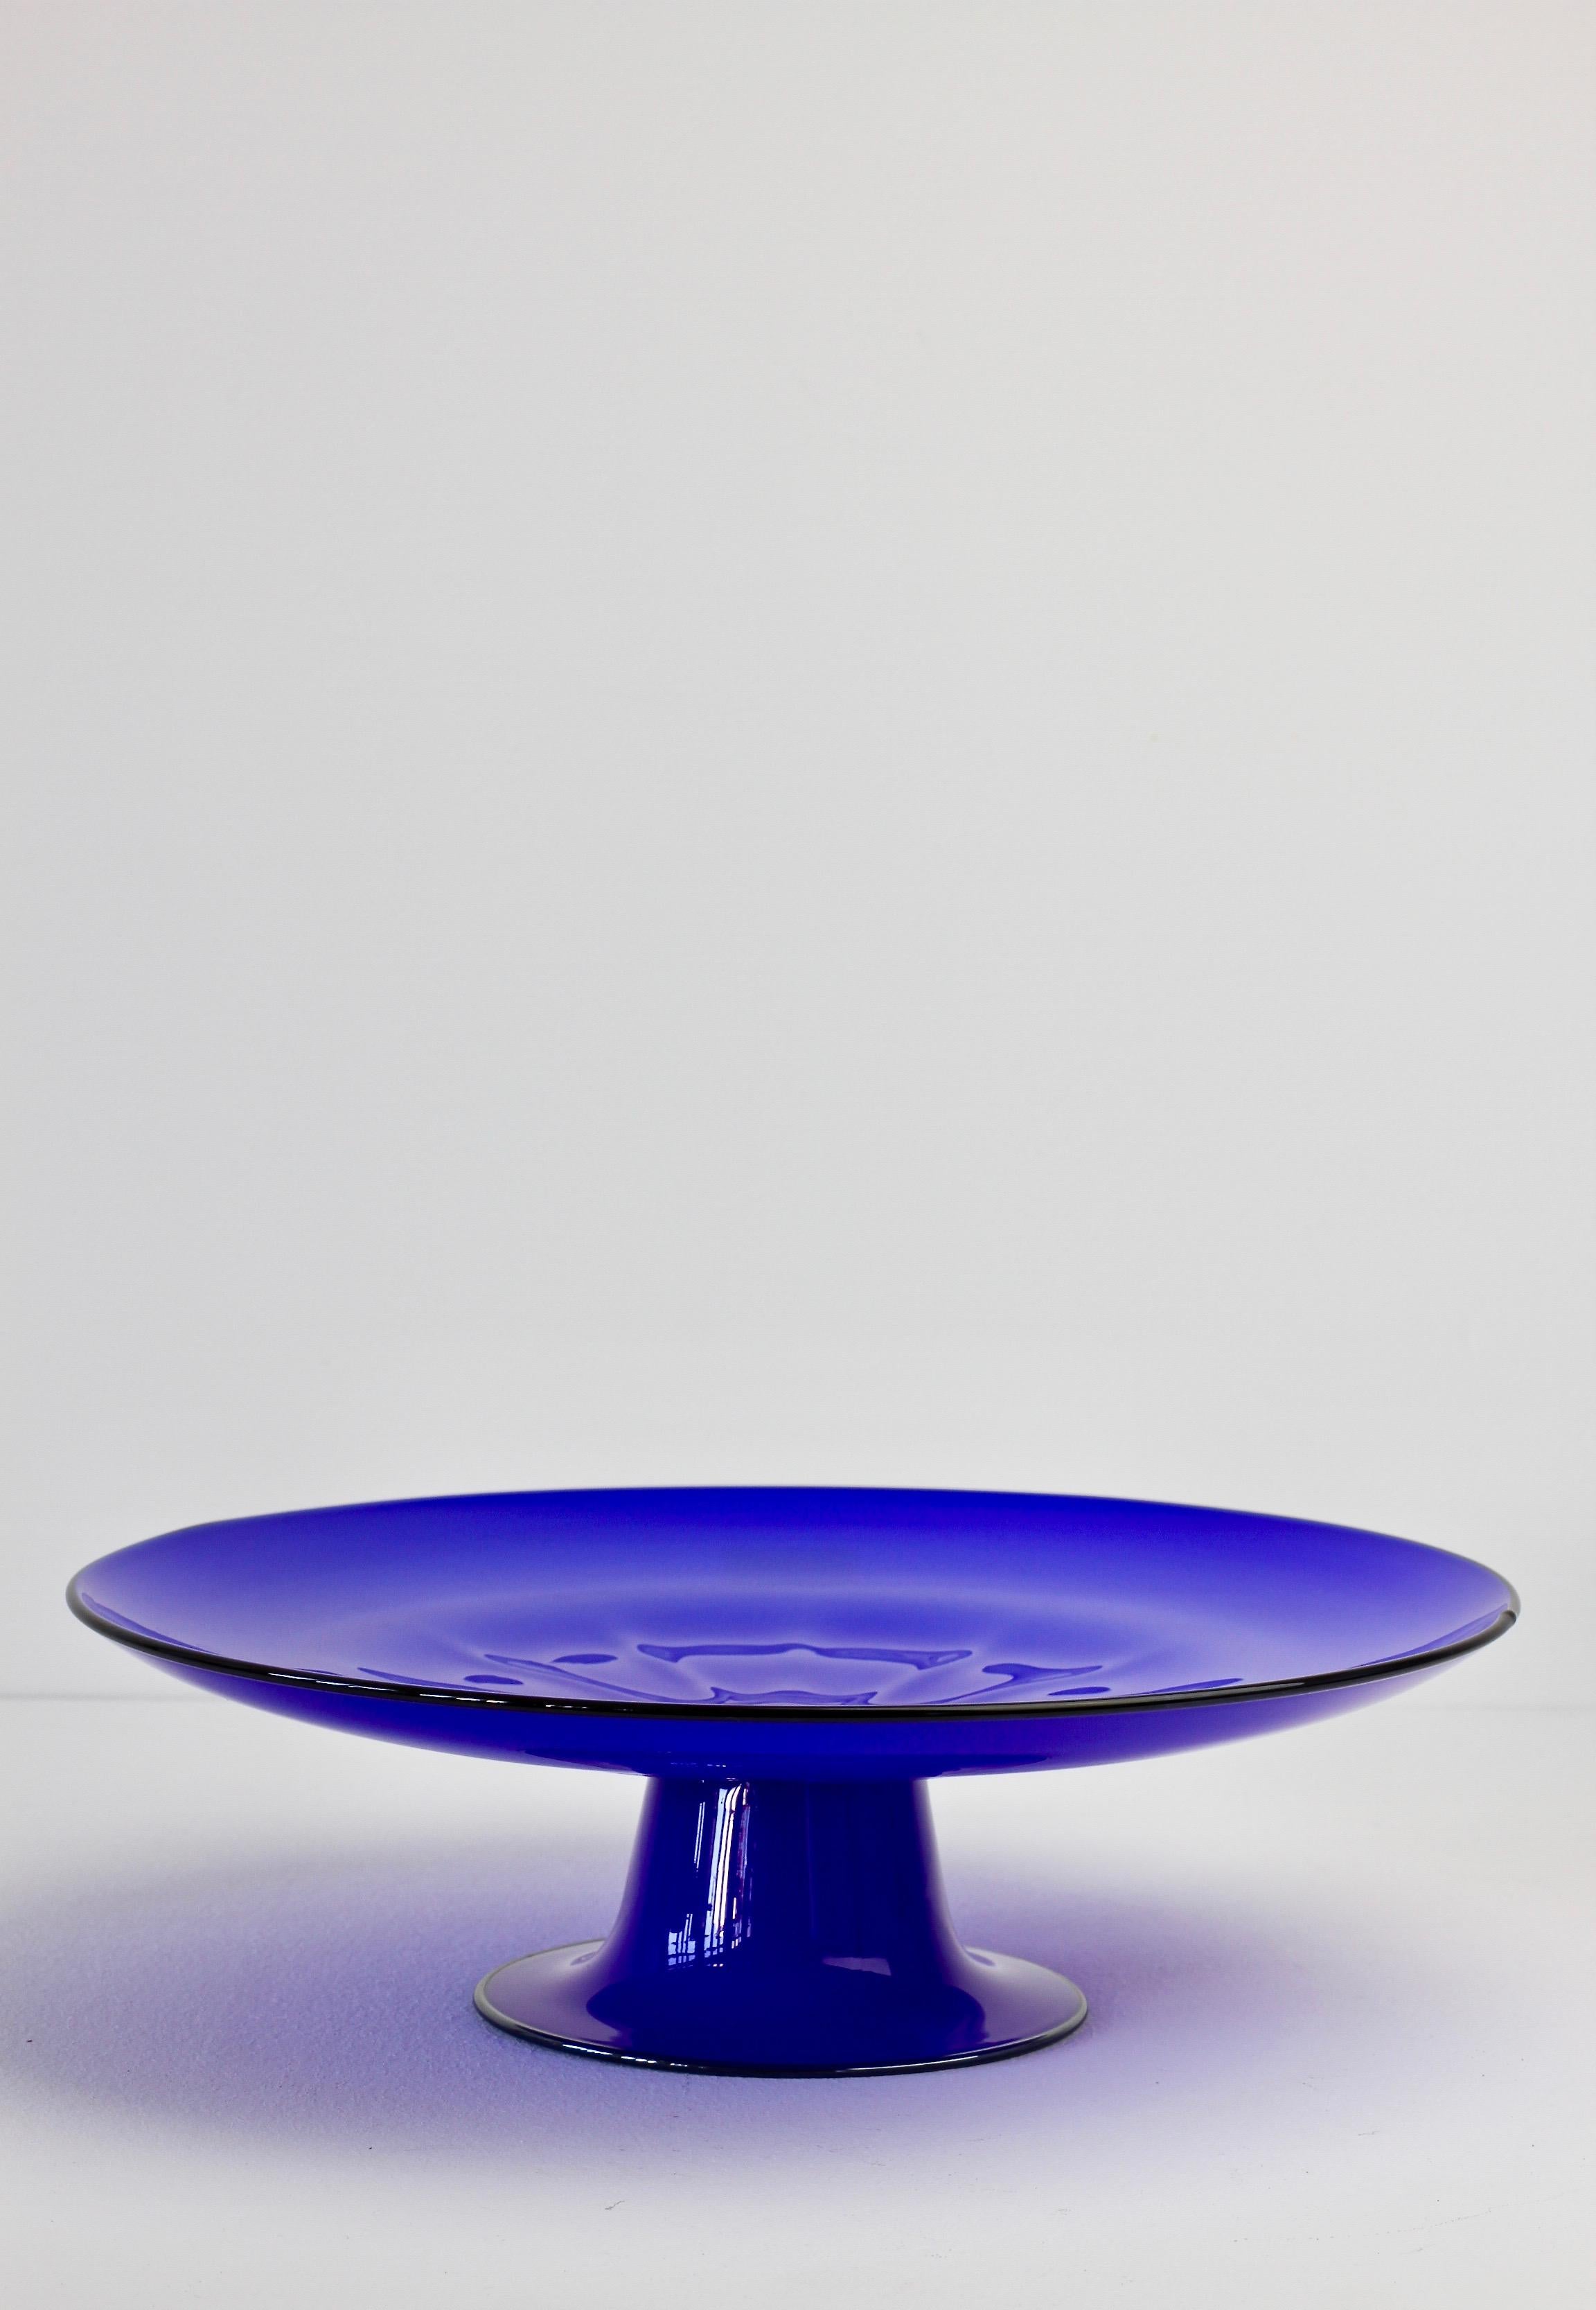 Glass cake stand or serving plate by Cenedese. Wonderful color/color of blue with black banding and simplistic yet elegant form. Fun to dine with vibrant vintage midcentury Murano glass serveware.
